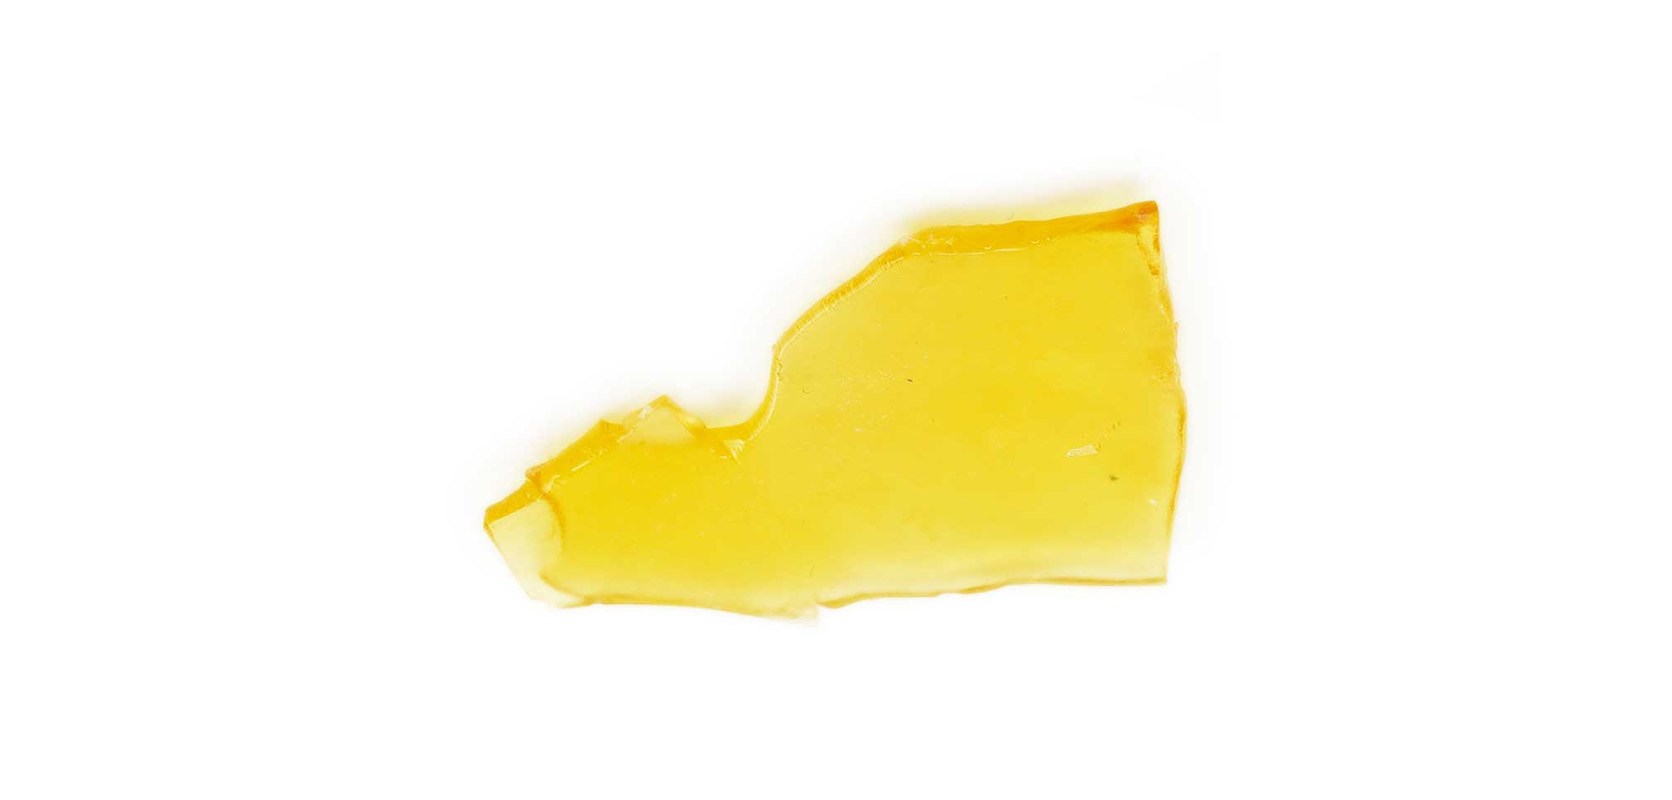 Alice in Wonderland shatter weed cannabis concentrate fro sale online Canada at Low Price Bud dispensary. BC cannabis and mail order marijuana online pot shop.